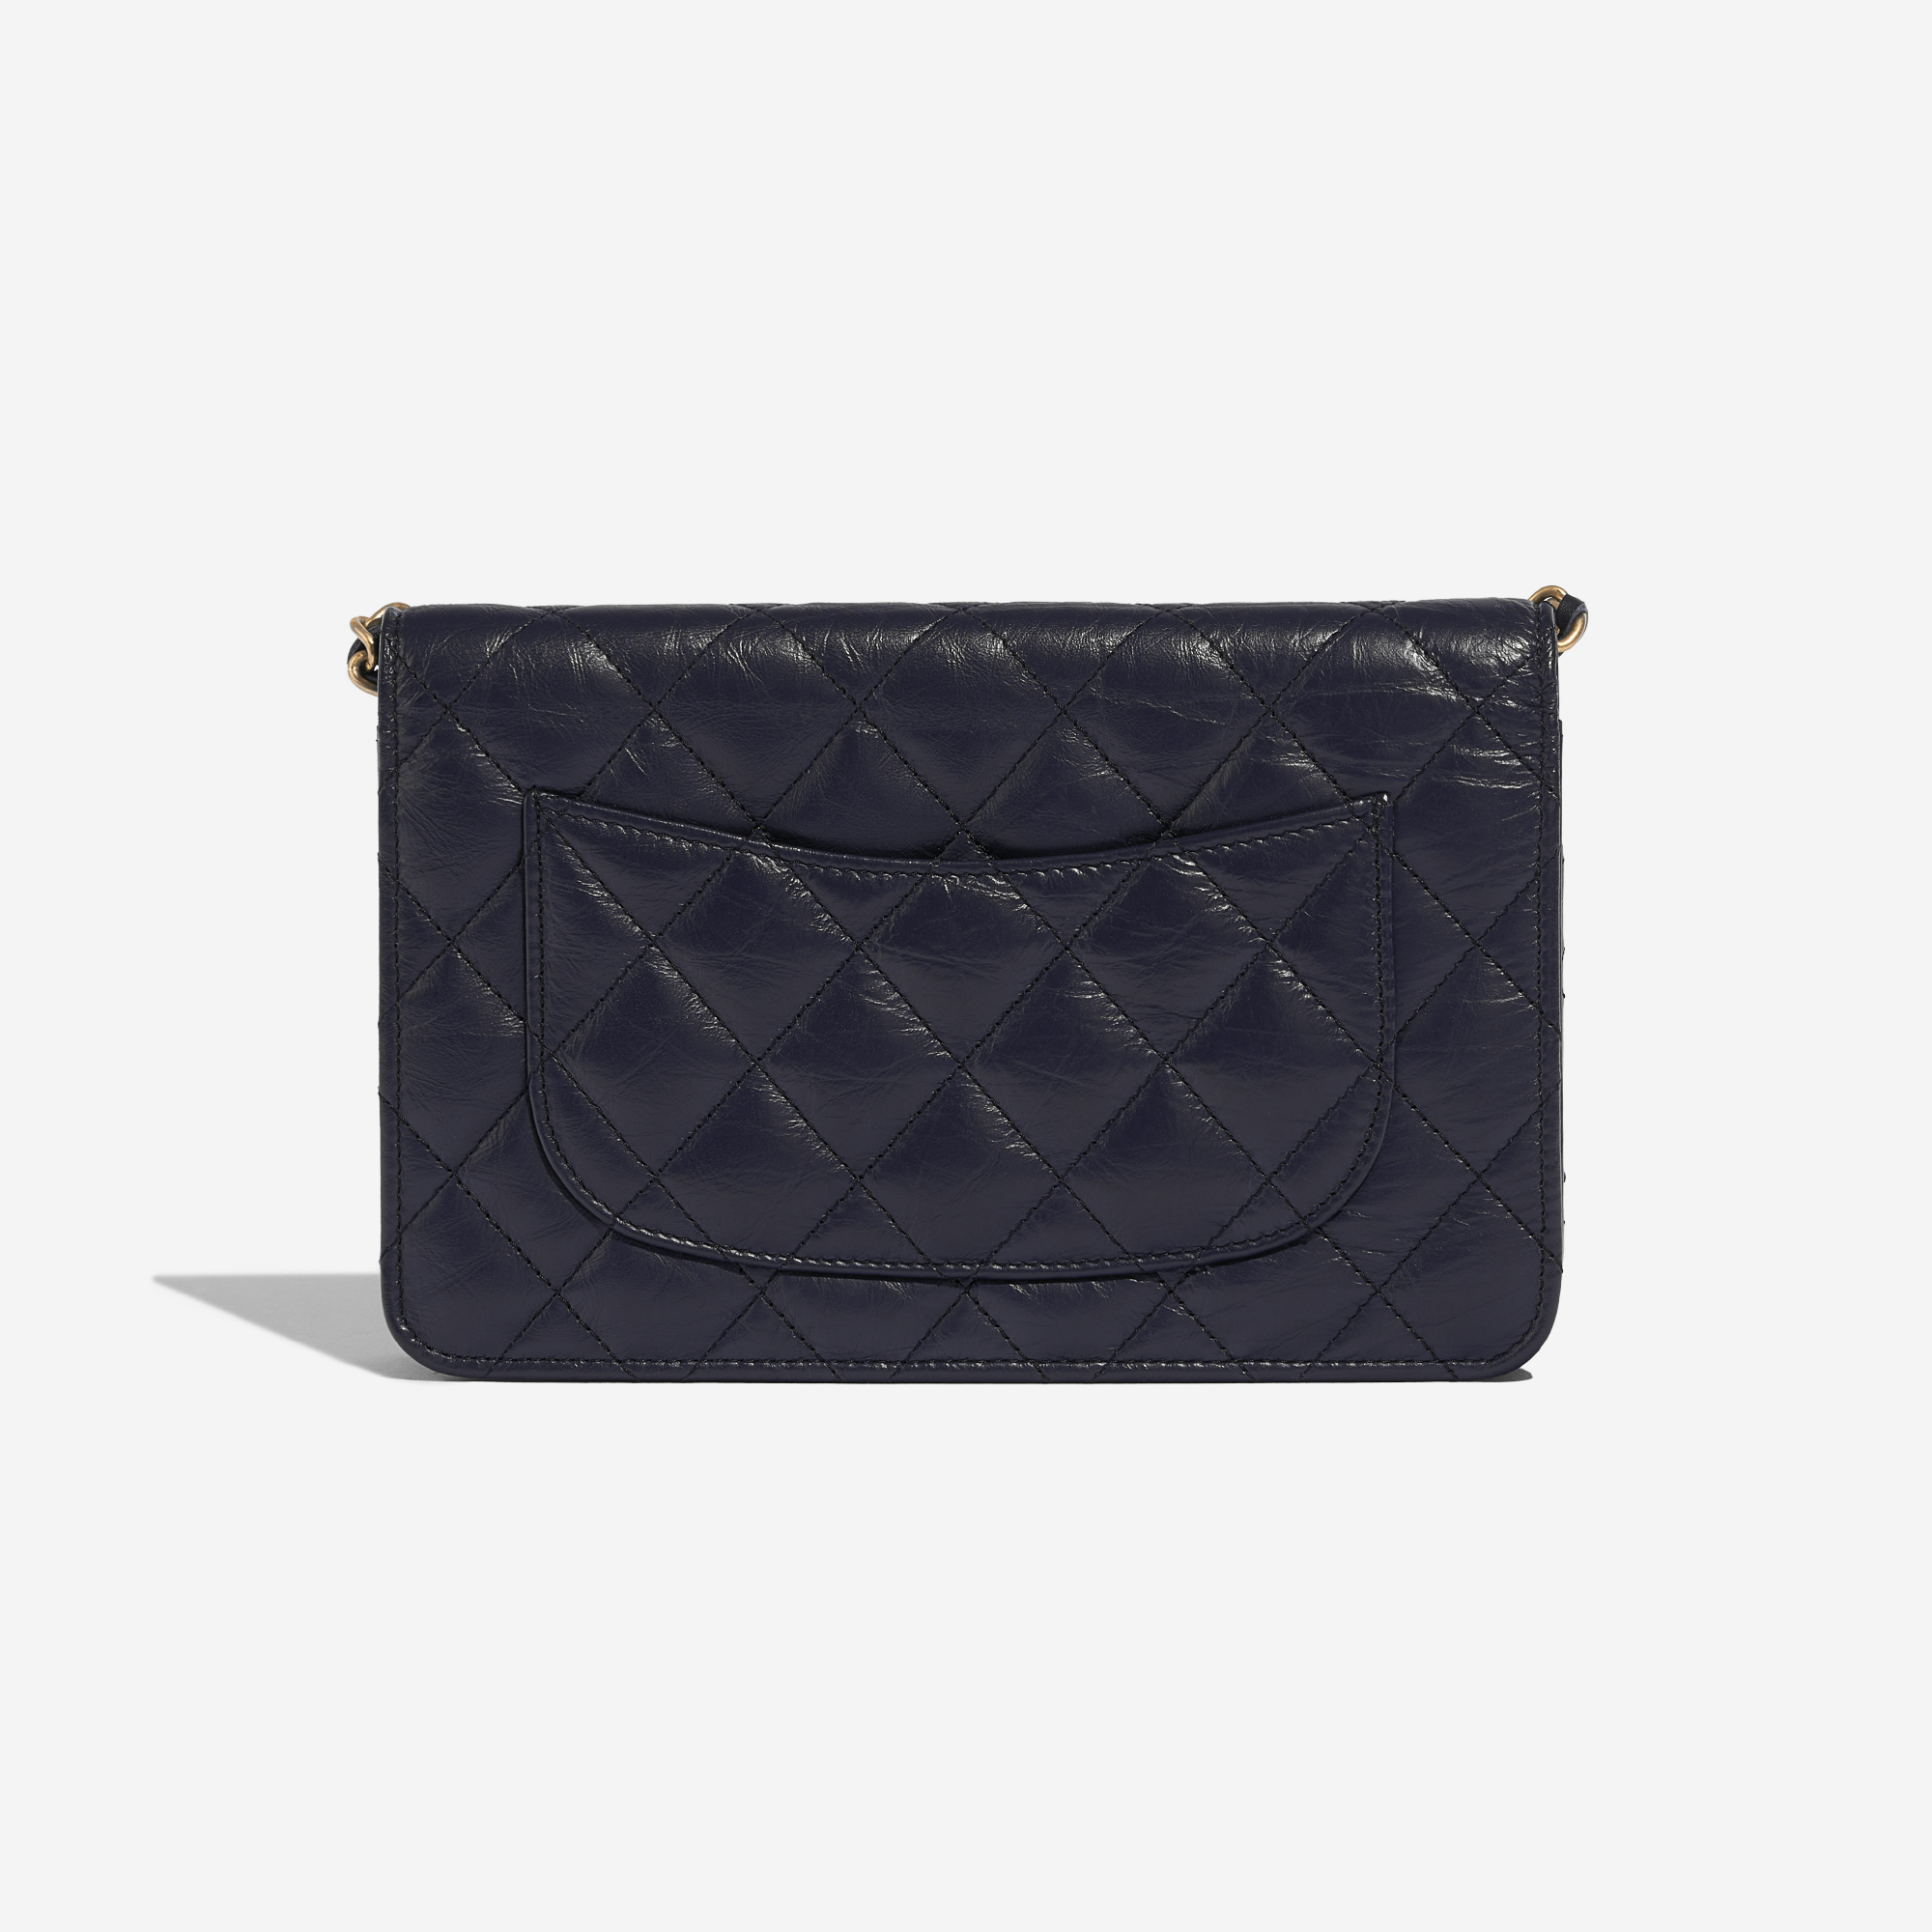 Pre-owned Chanel bag 2.55 Reissue WOC Aged Calf Navy Blue Blue Back | Sell your designer bag on Saclab.com